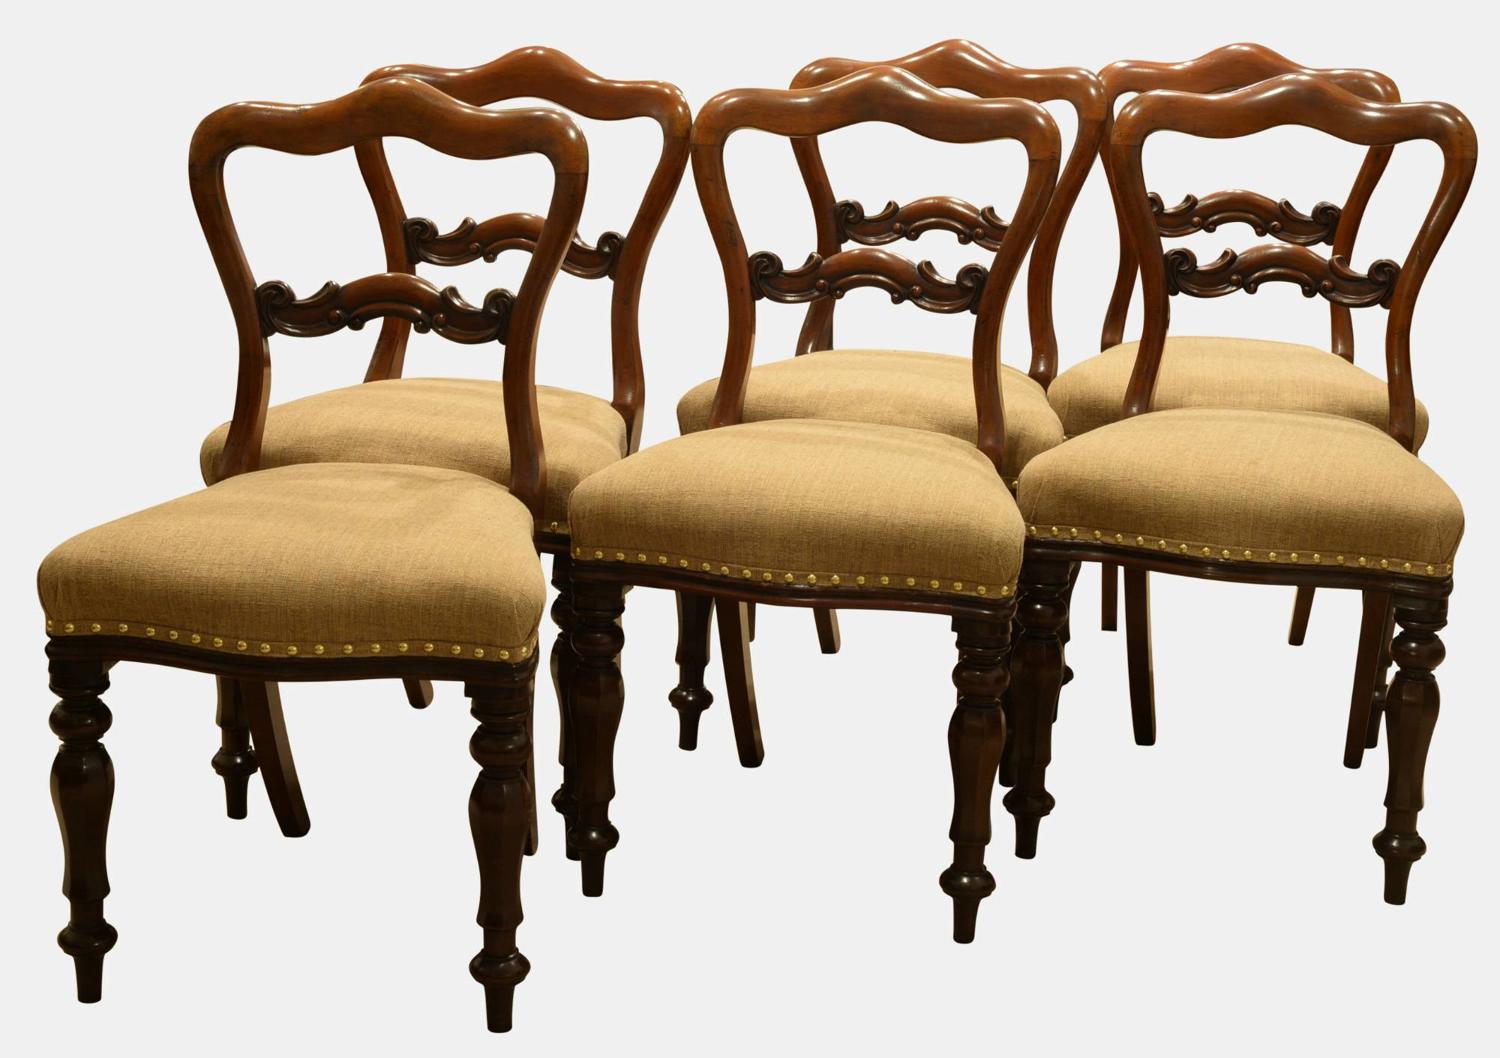 Set of 6 Mahogany Victorian Period Chairs